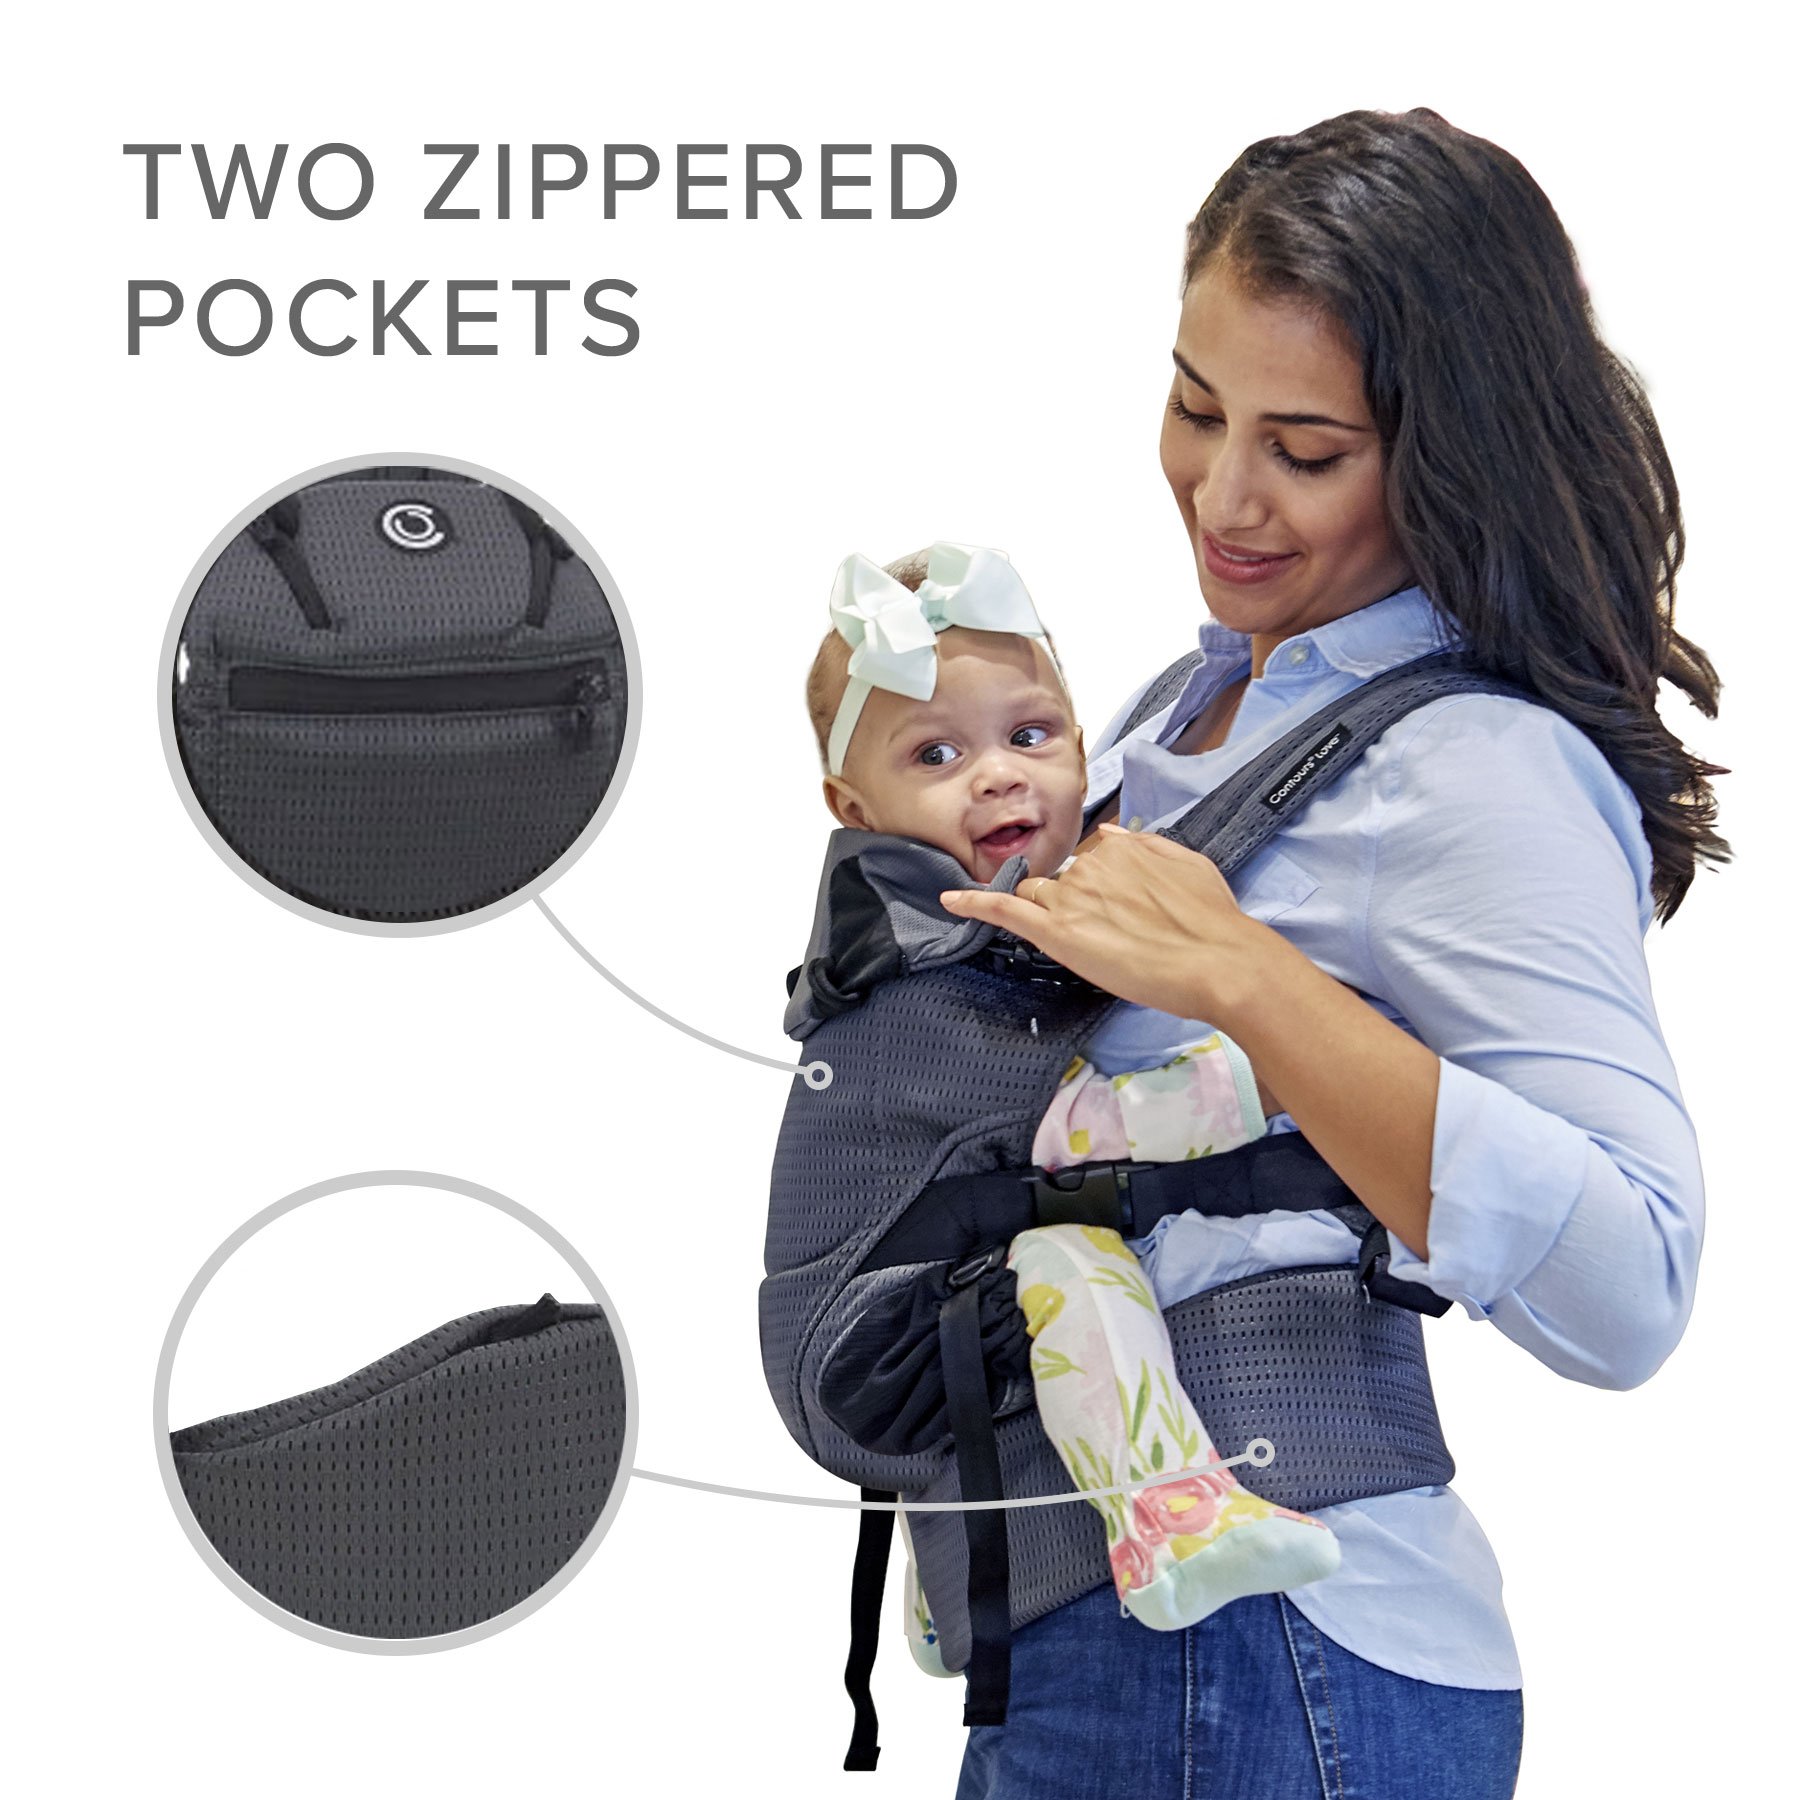 Contours Baby Carrier Newborn to Toddler |Love 3 Position Convertible Easy-to-Use Baby Carrier with Pockets for Men and Women, Newborn, Front Face in and Front Face Out (8-30lbs) - Charcoal Gray